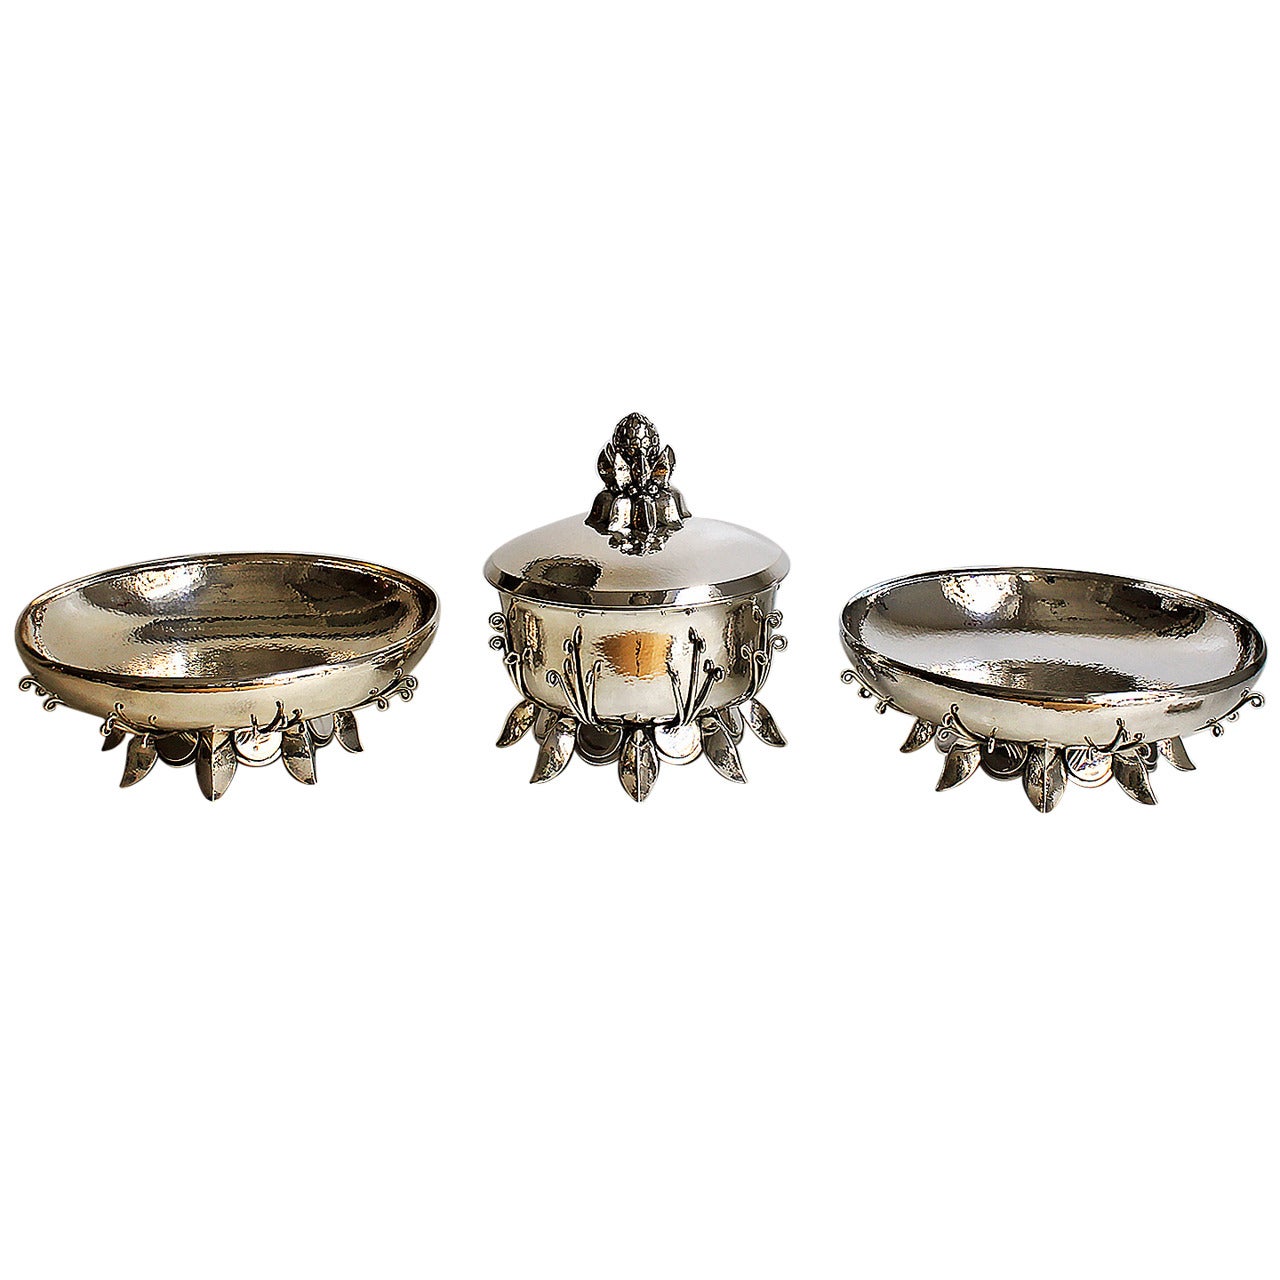 Sterling silver 3 pieces center table by Armengol